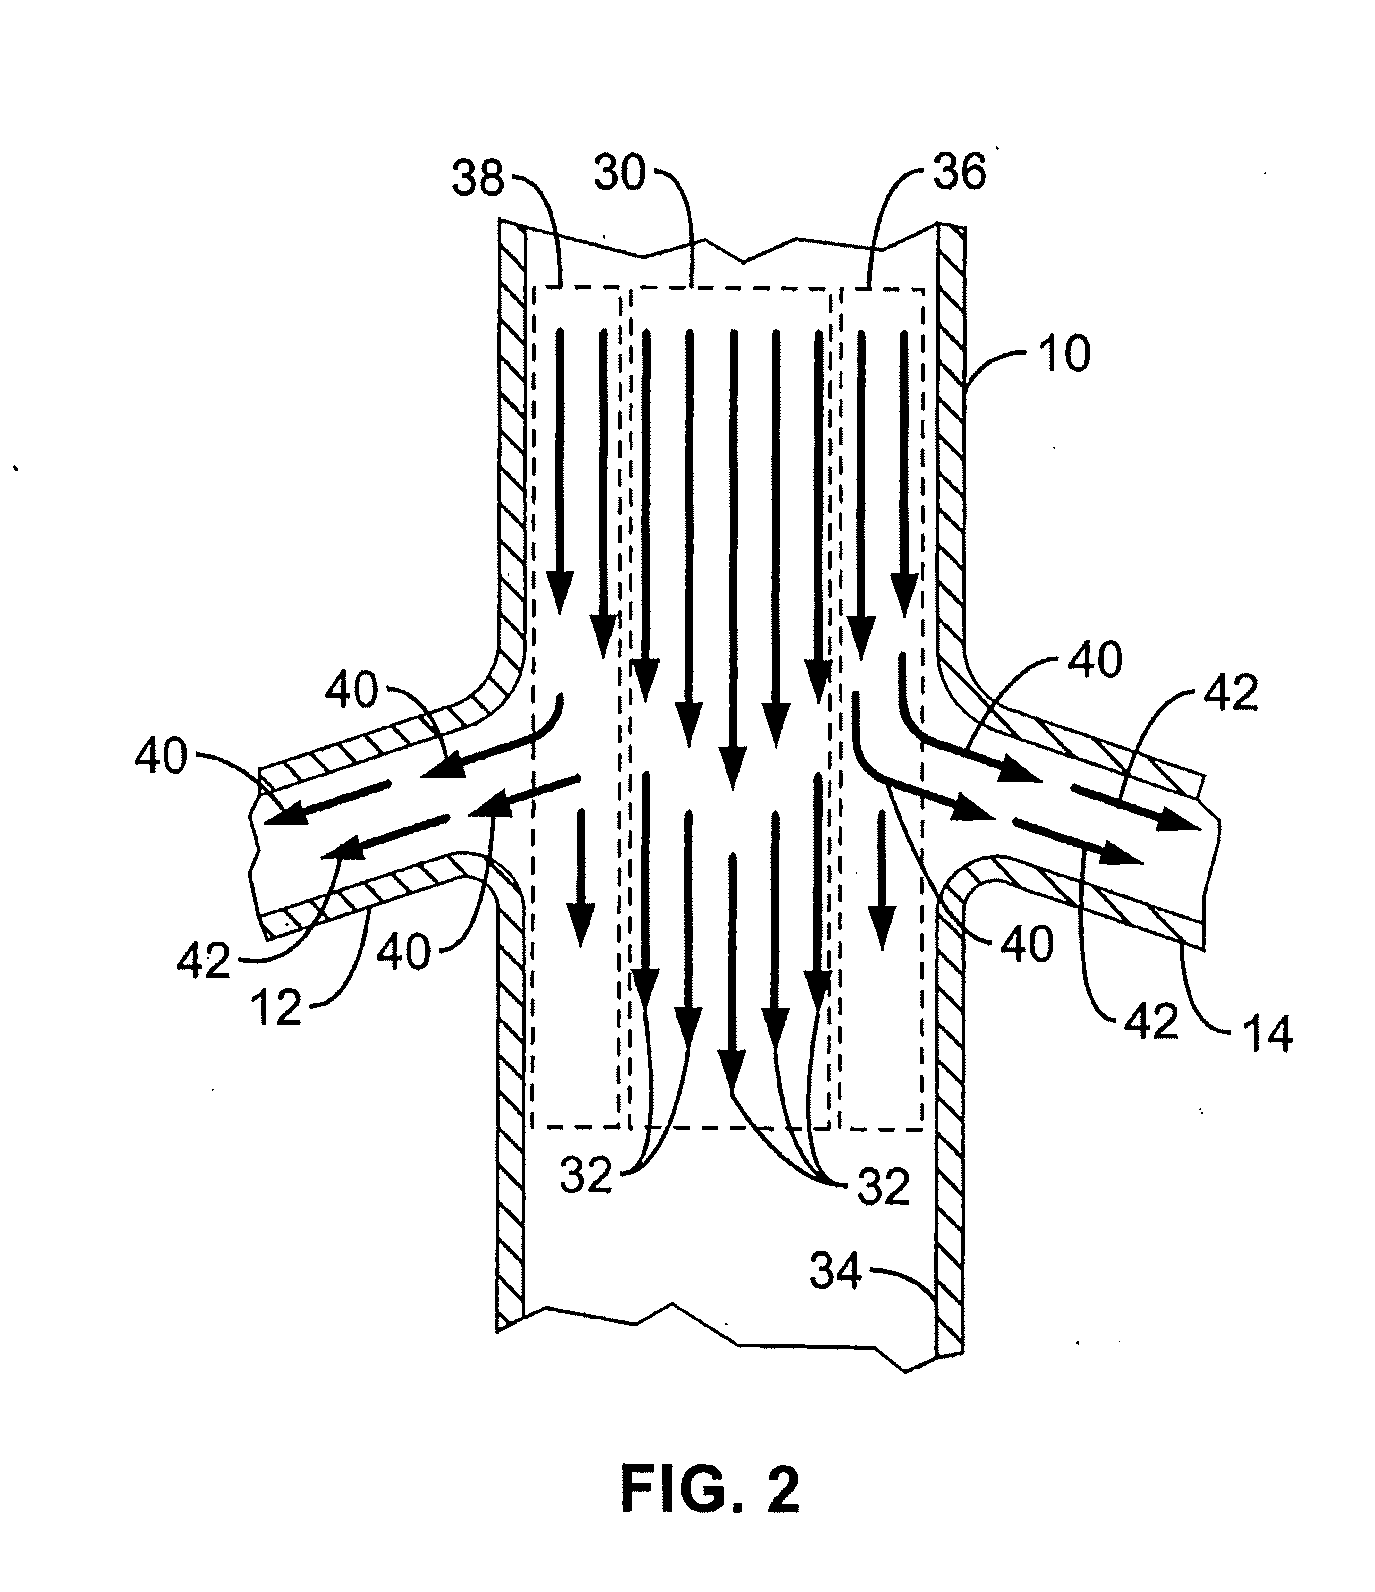 Method and Apparatus for Intra-Aortic Substance Delivery to a Branch Vessel